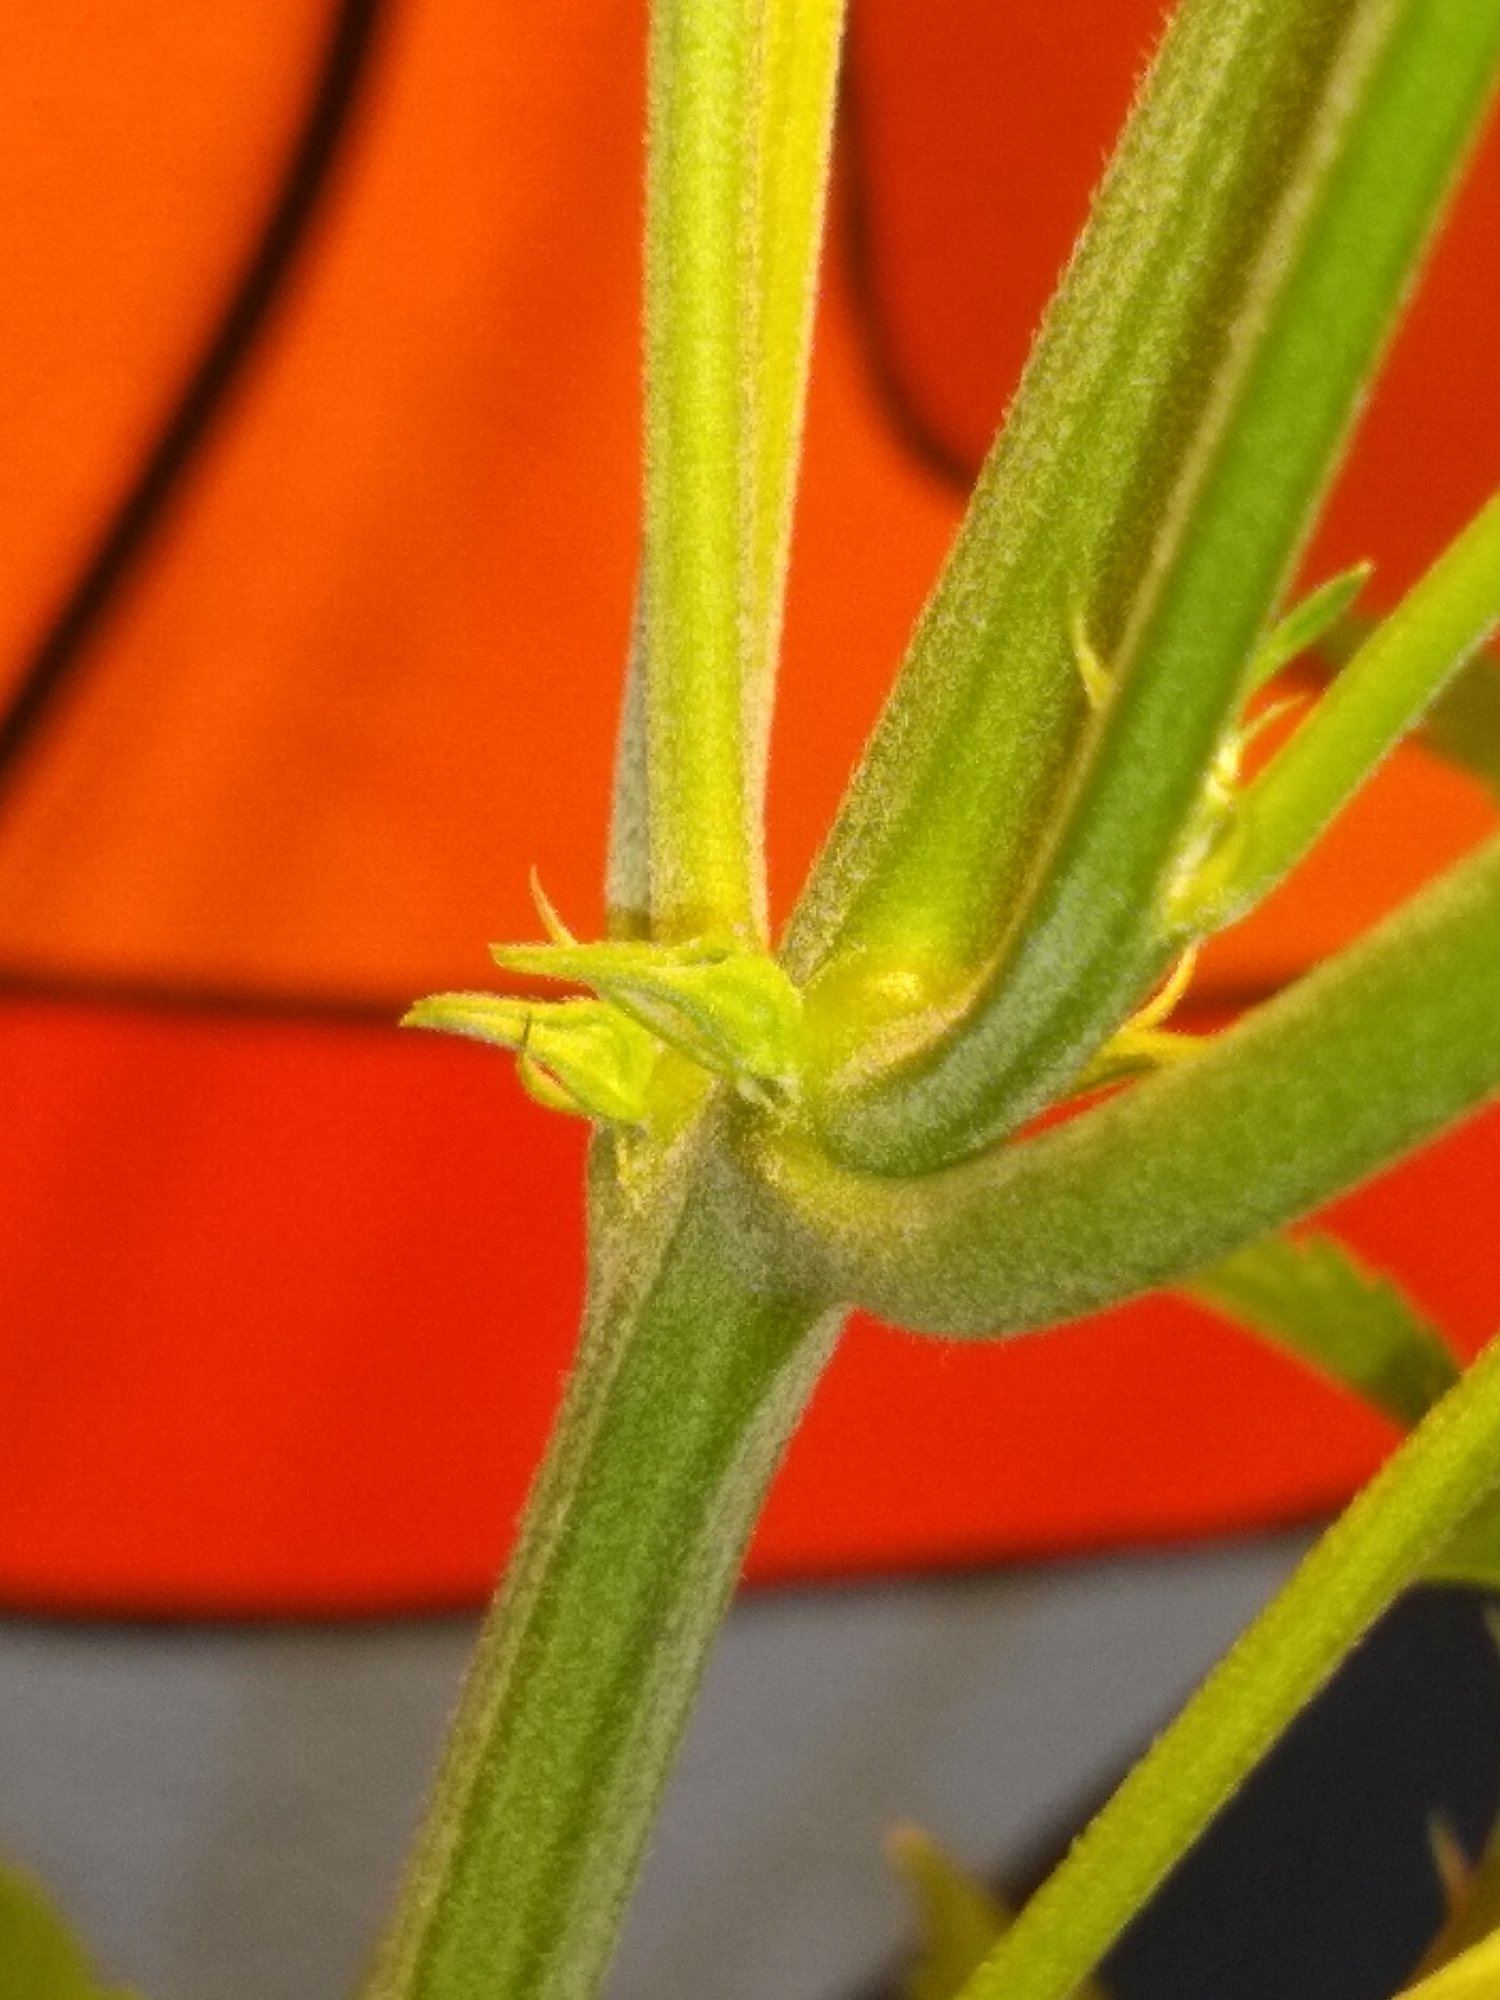 Preflowers without hairs